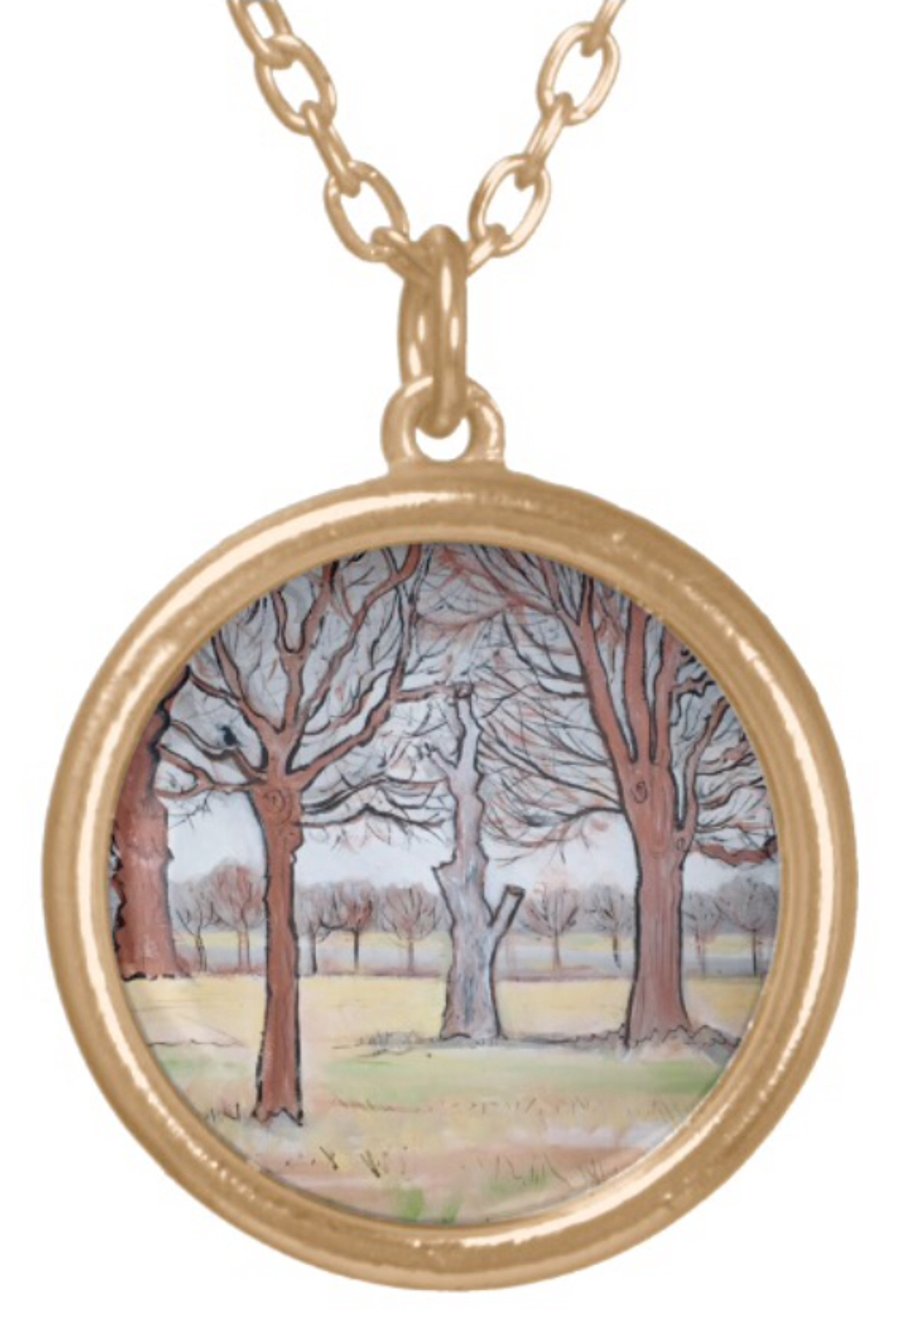 Beautiful Pendant featuring the design ‘Midwinter’